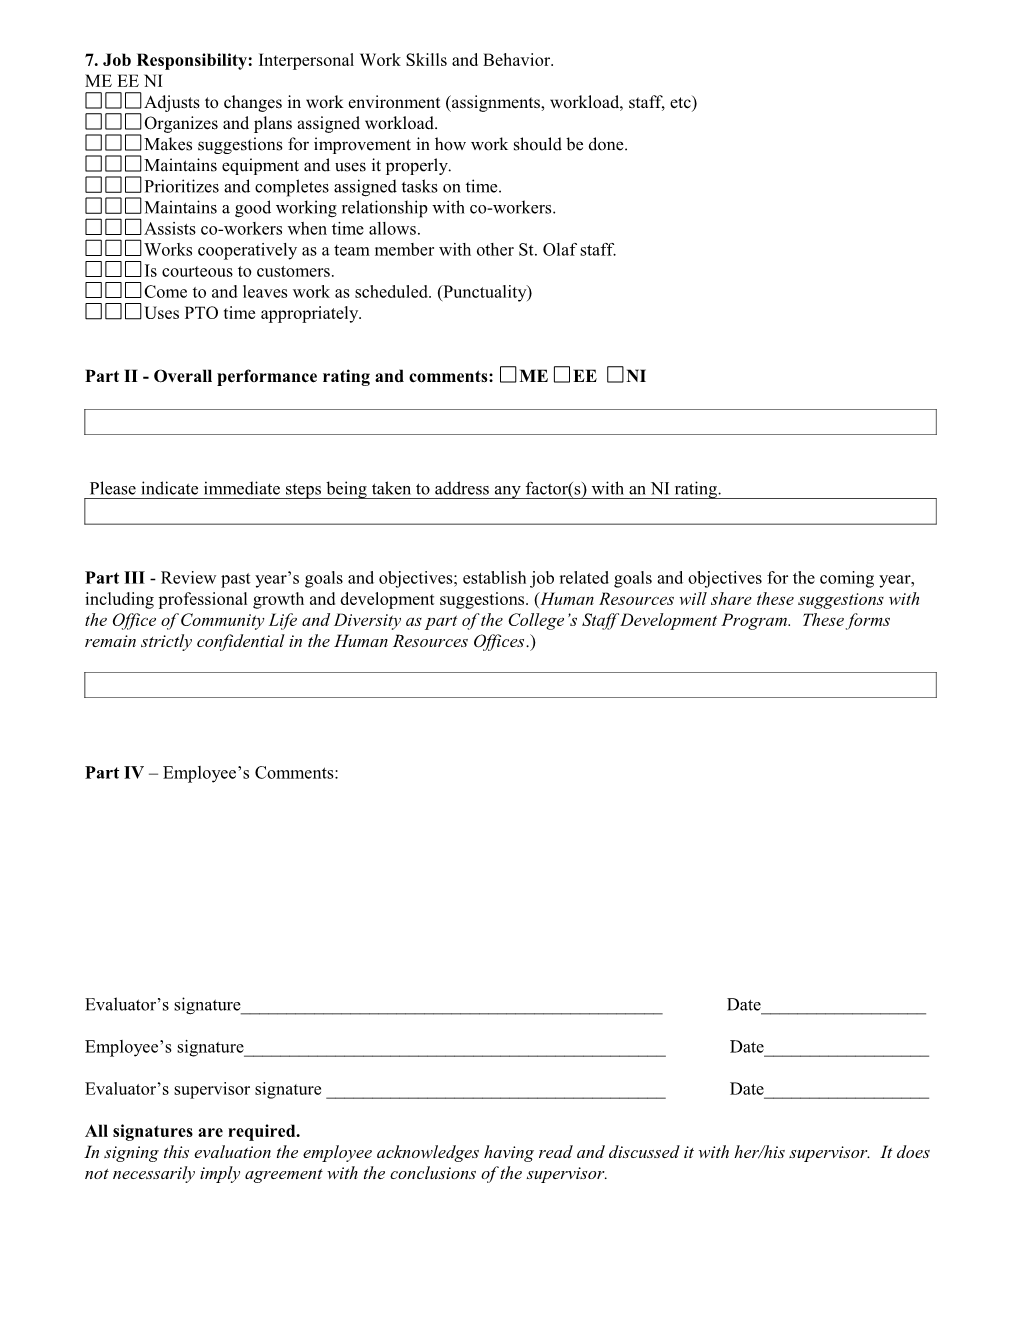 Operating Engineer Yearly Review Fill-In Form